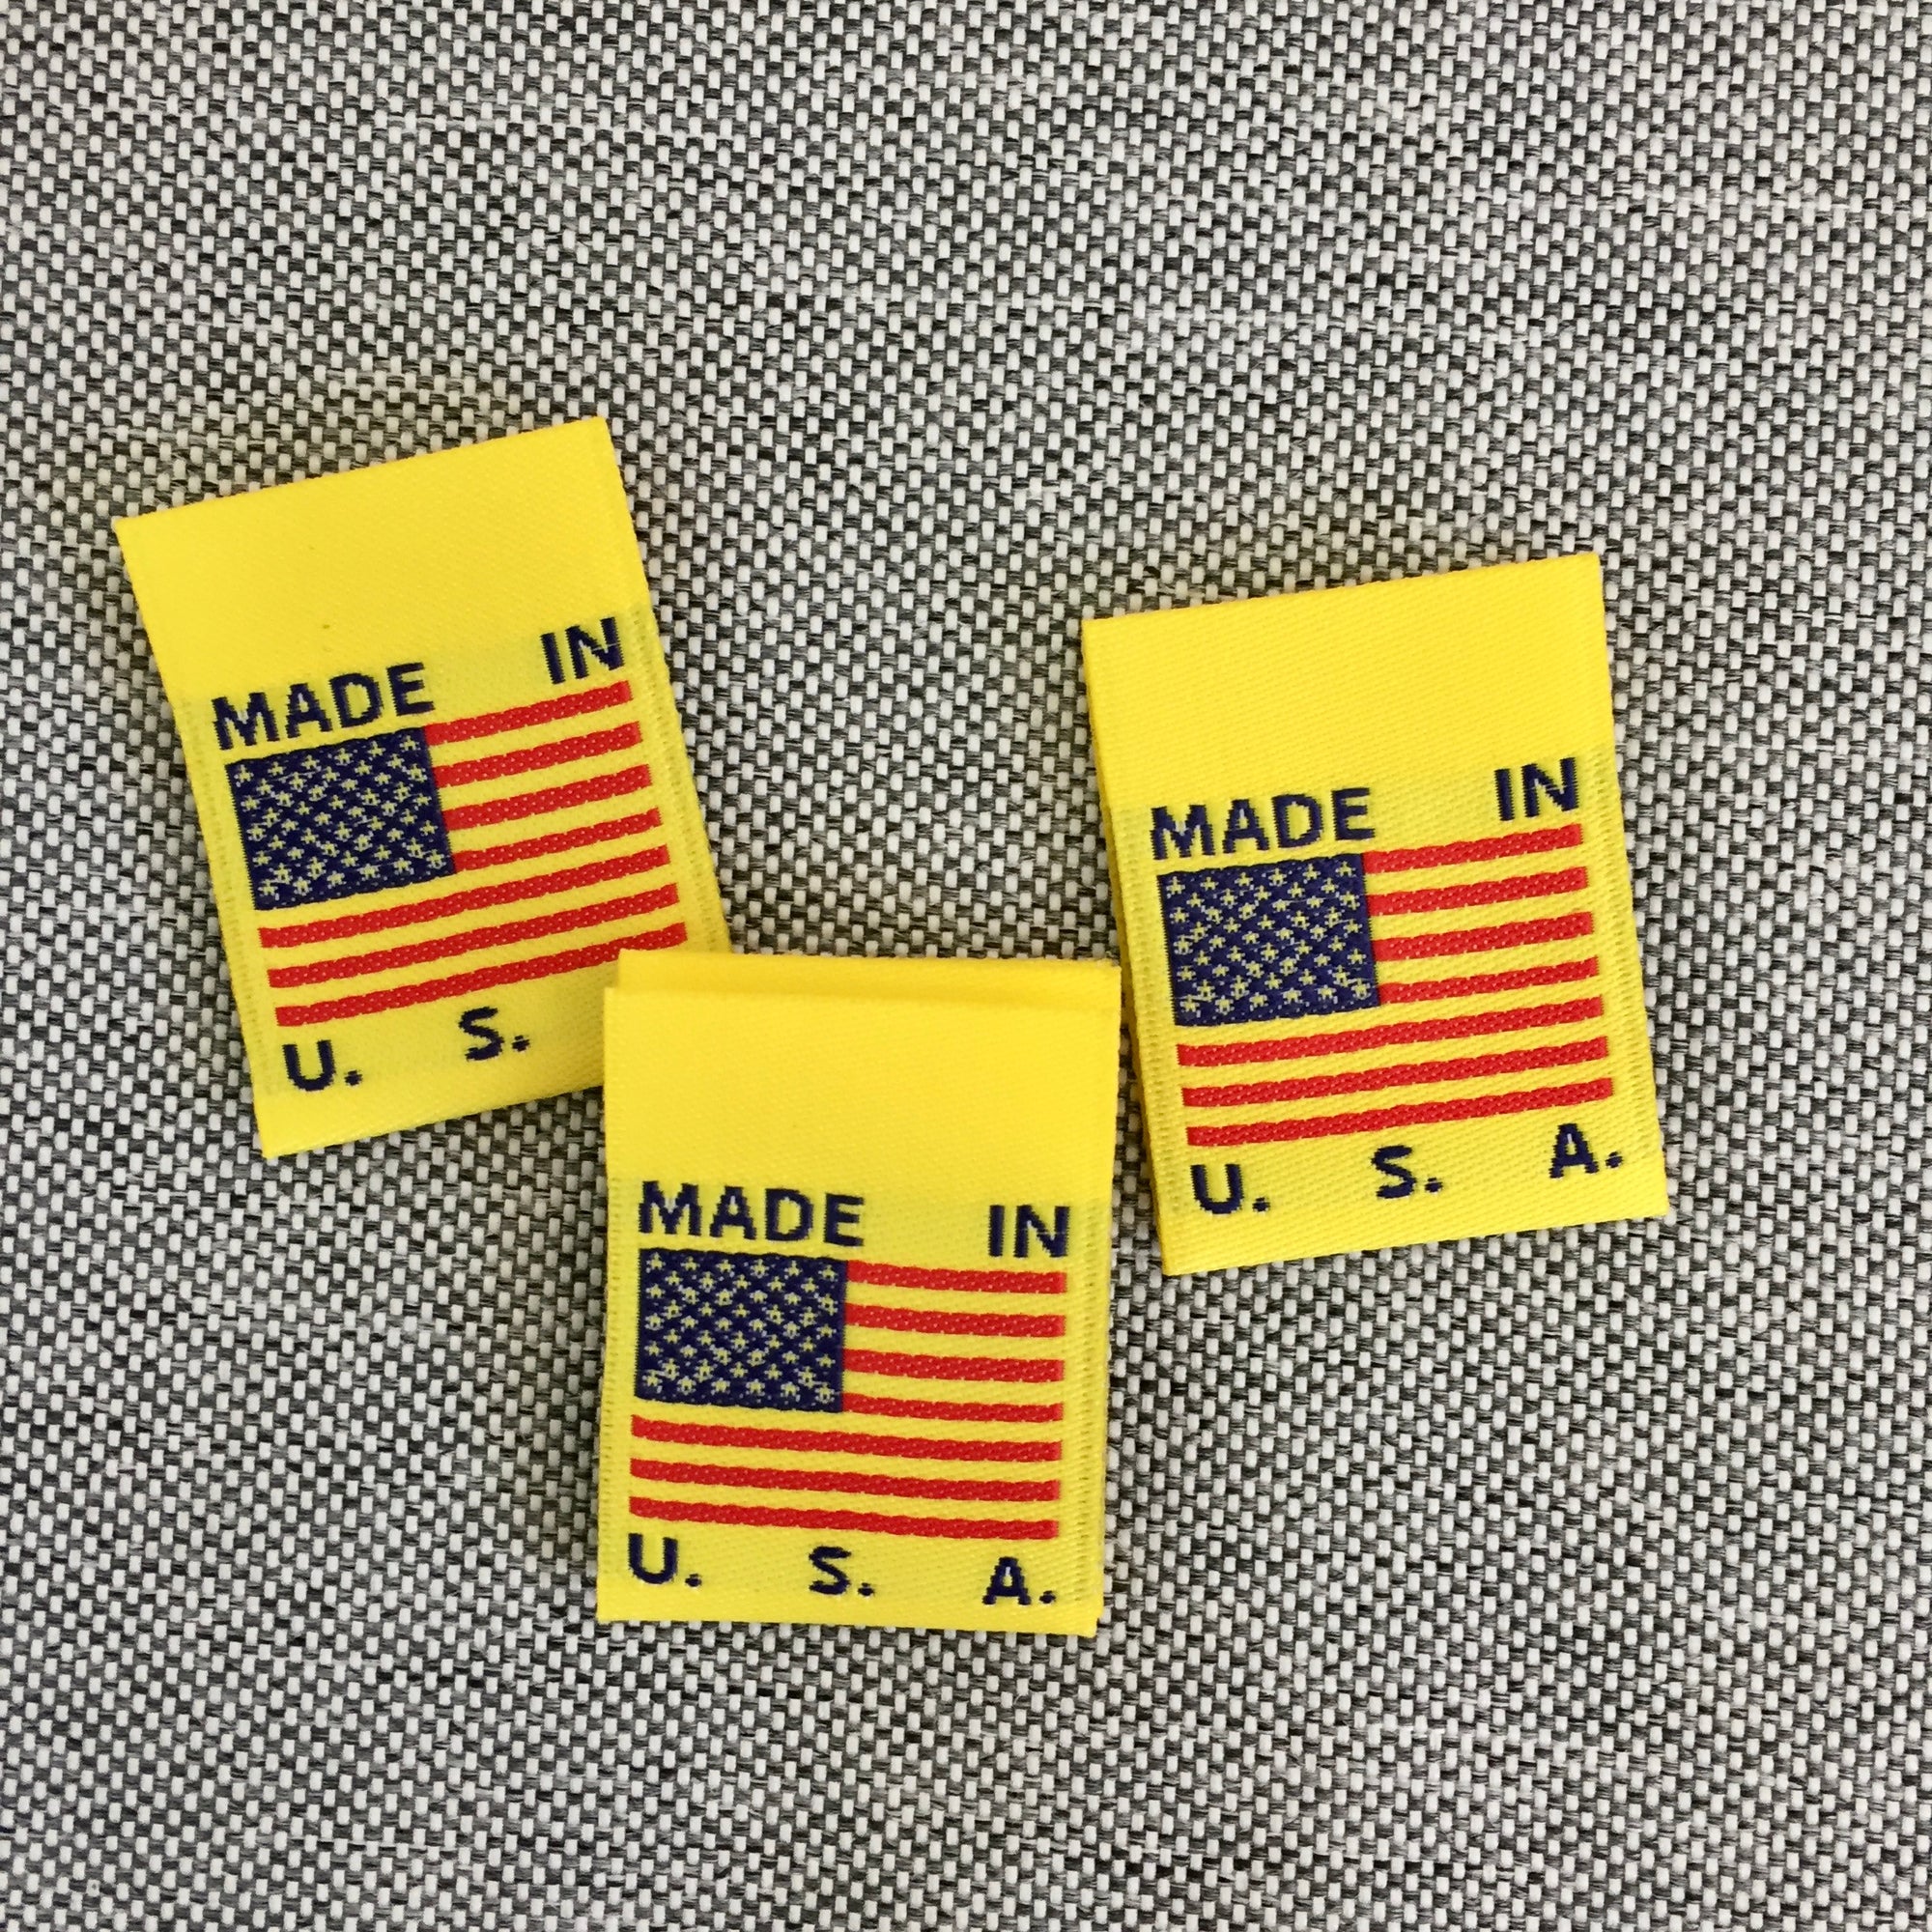 MADE IN USA FLAG Clothing Labels (YELLOW)